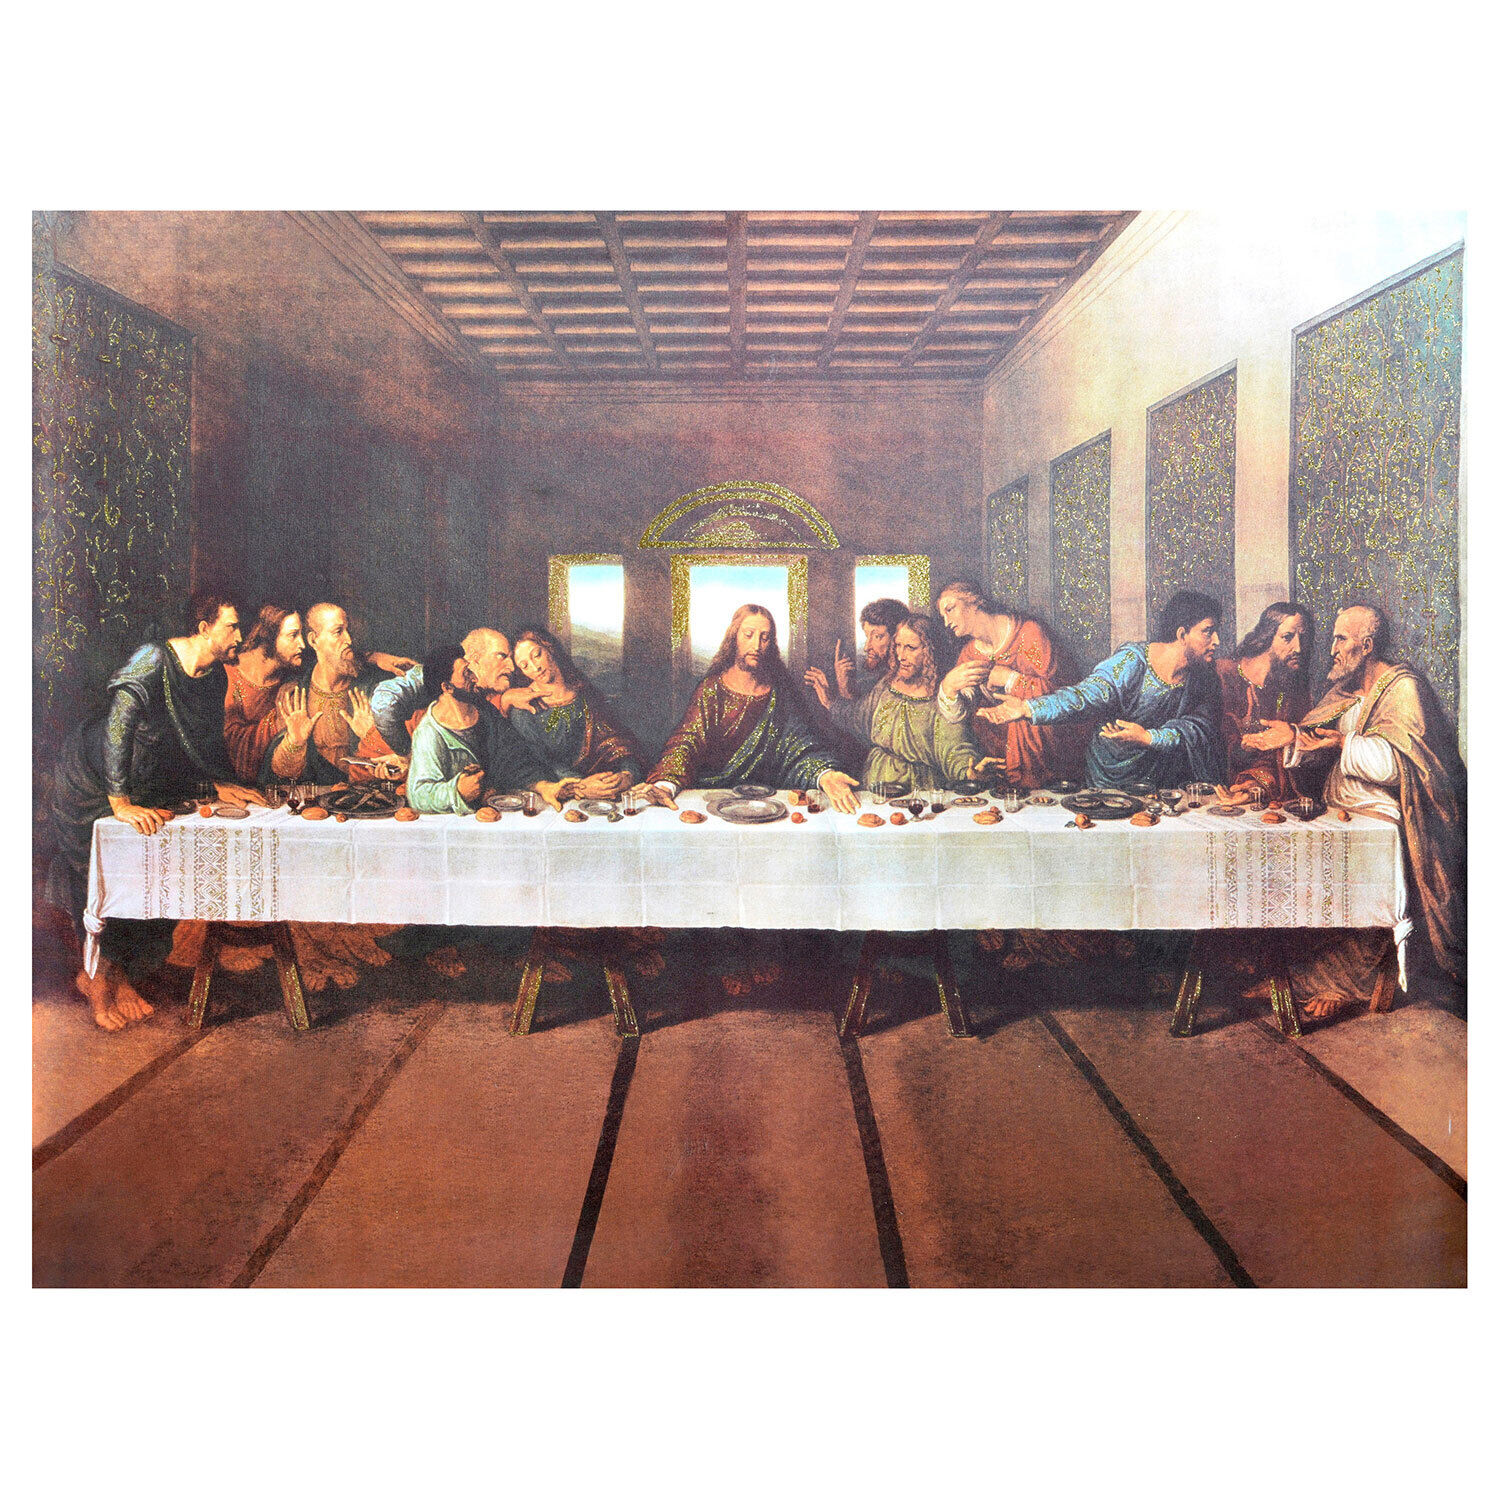 PREMIUS The Last Supper Oversized Hand Embellished Canvas, 47.5x35.5 Inches